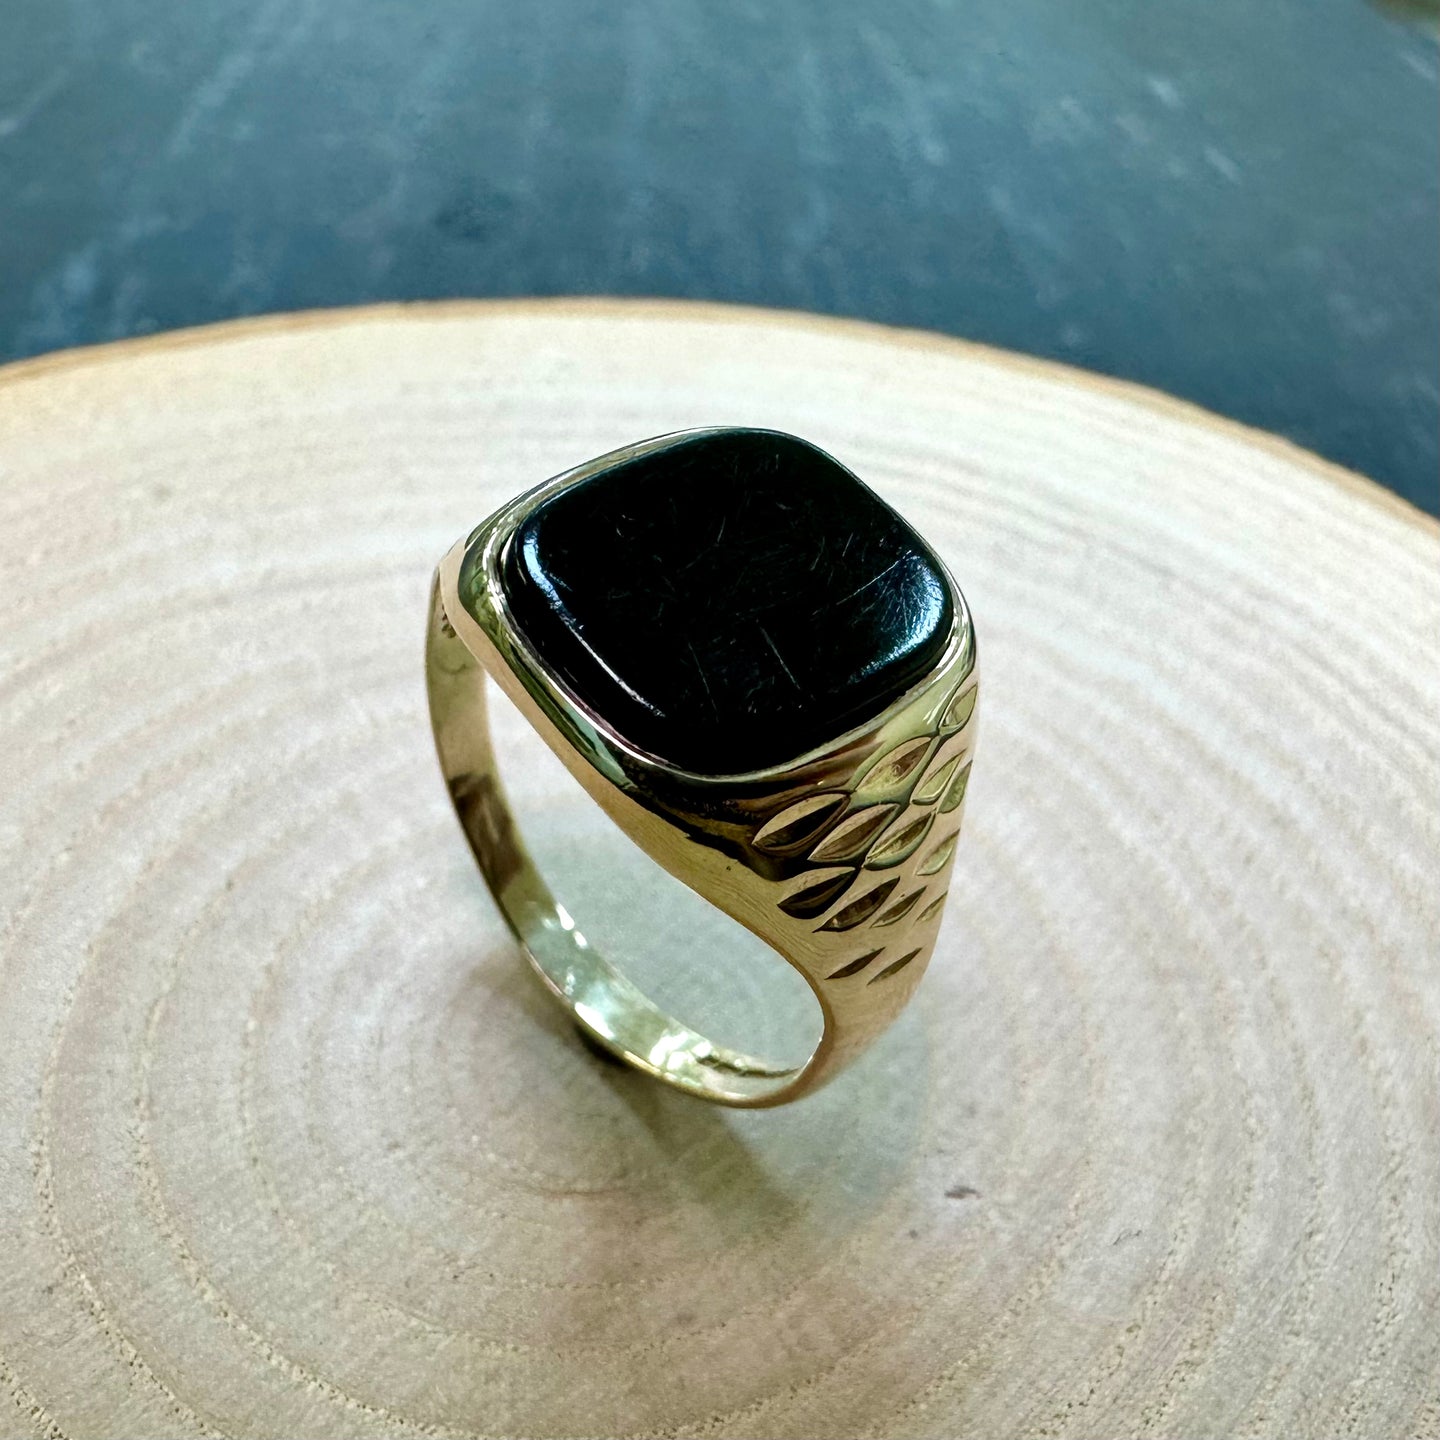 Preloved 9ct Yellow Gold Onyx Signet Ring, Patterned Shoulders